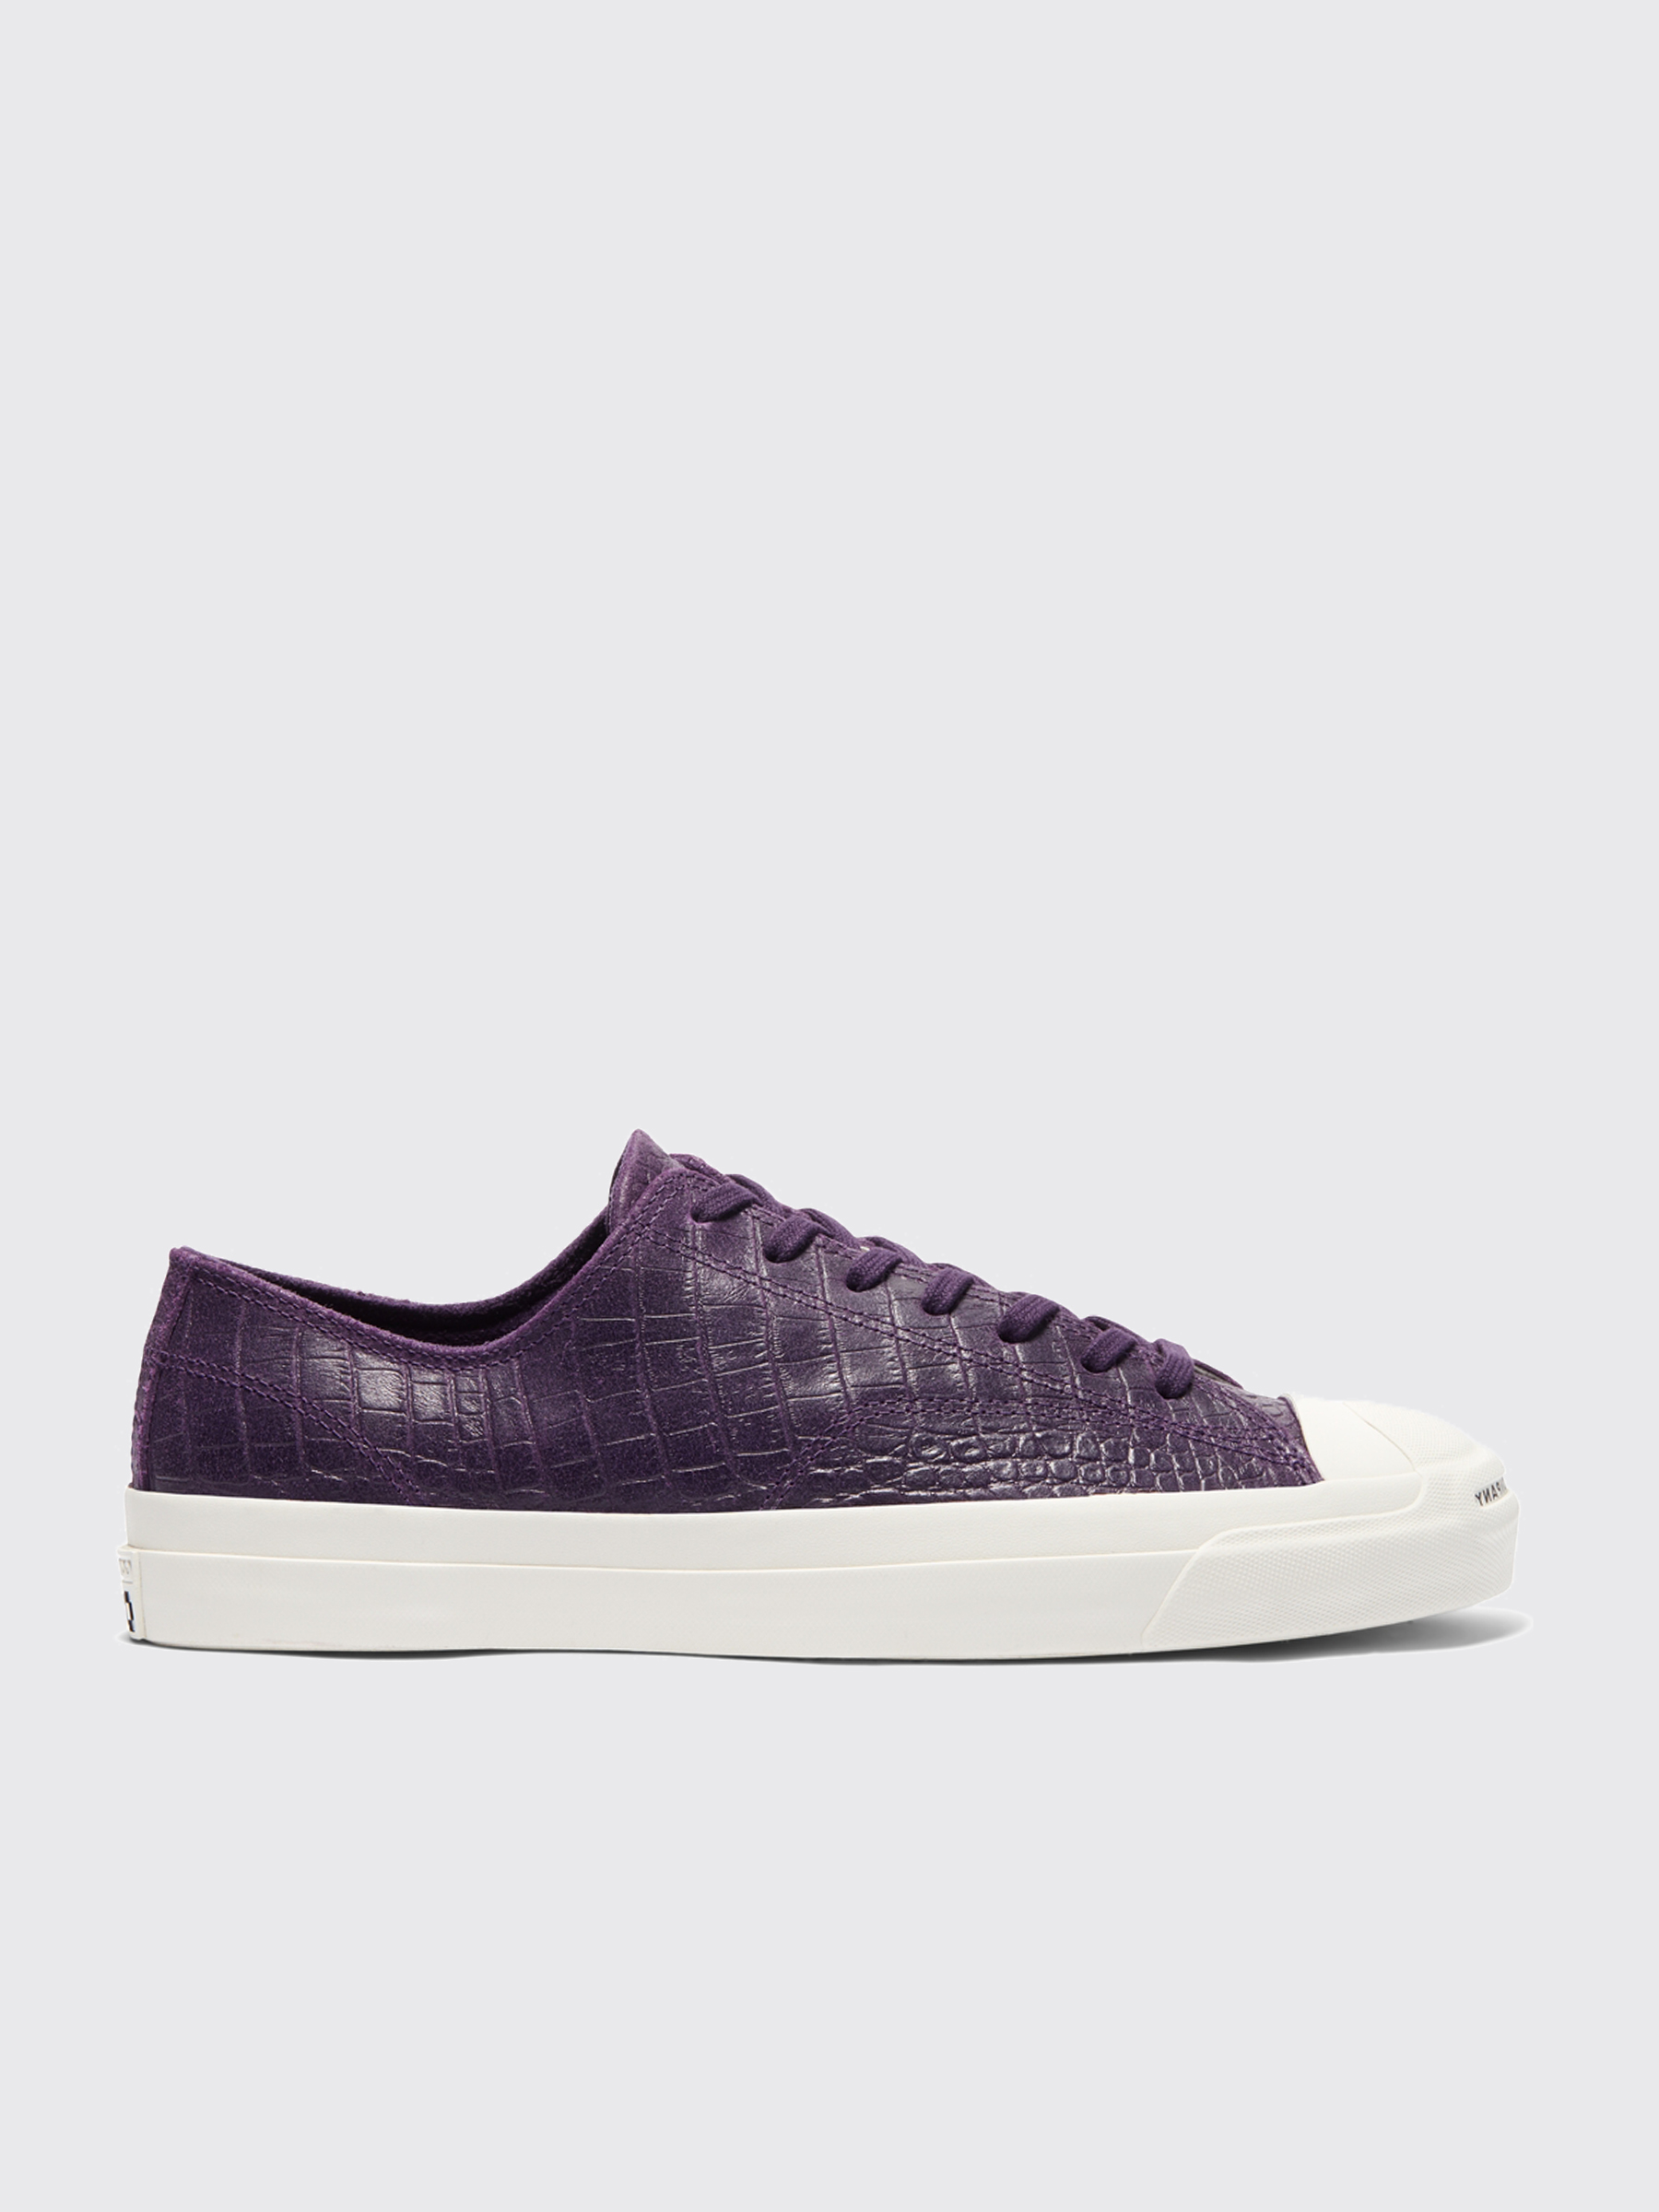 converse cons jack purcell